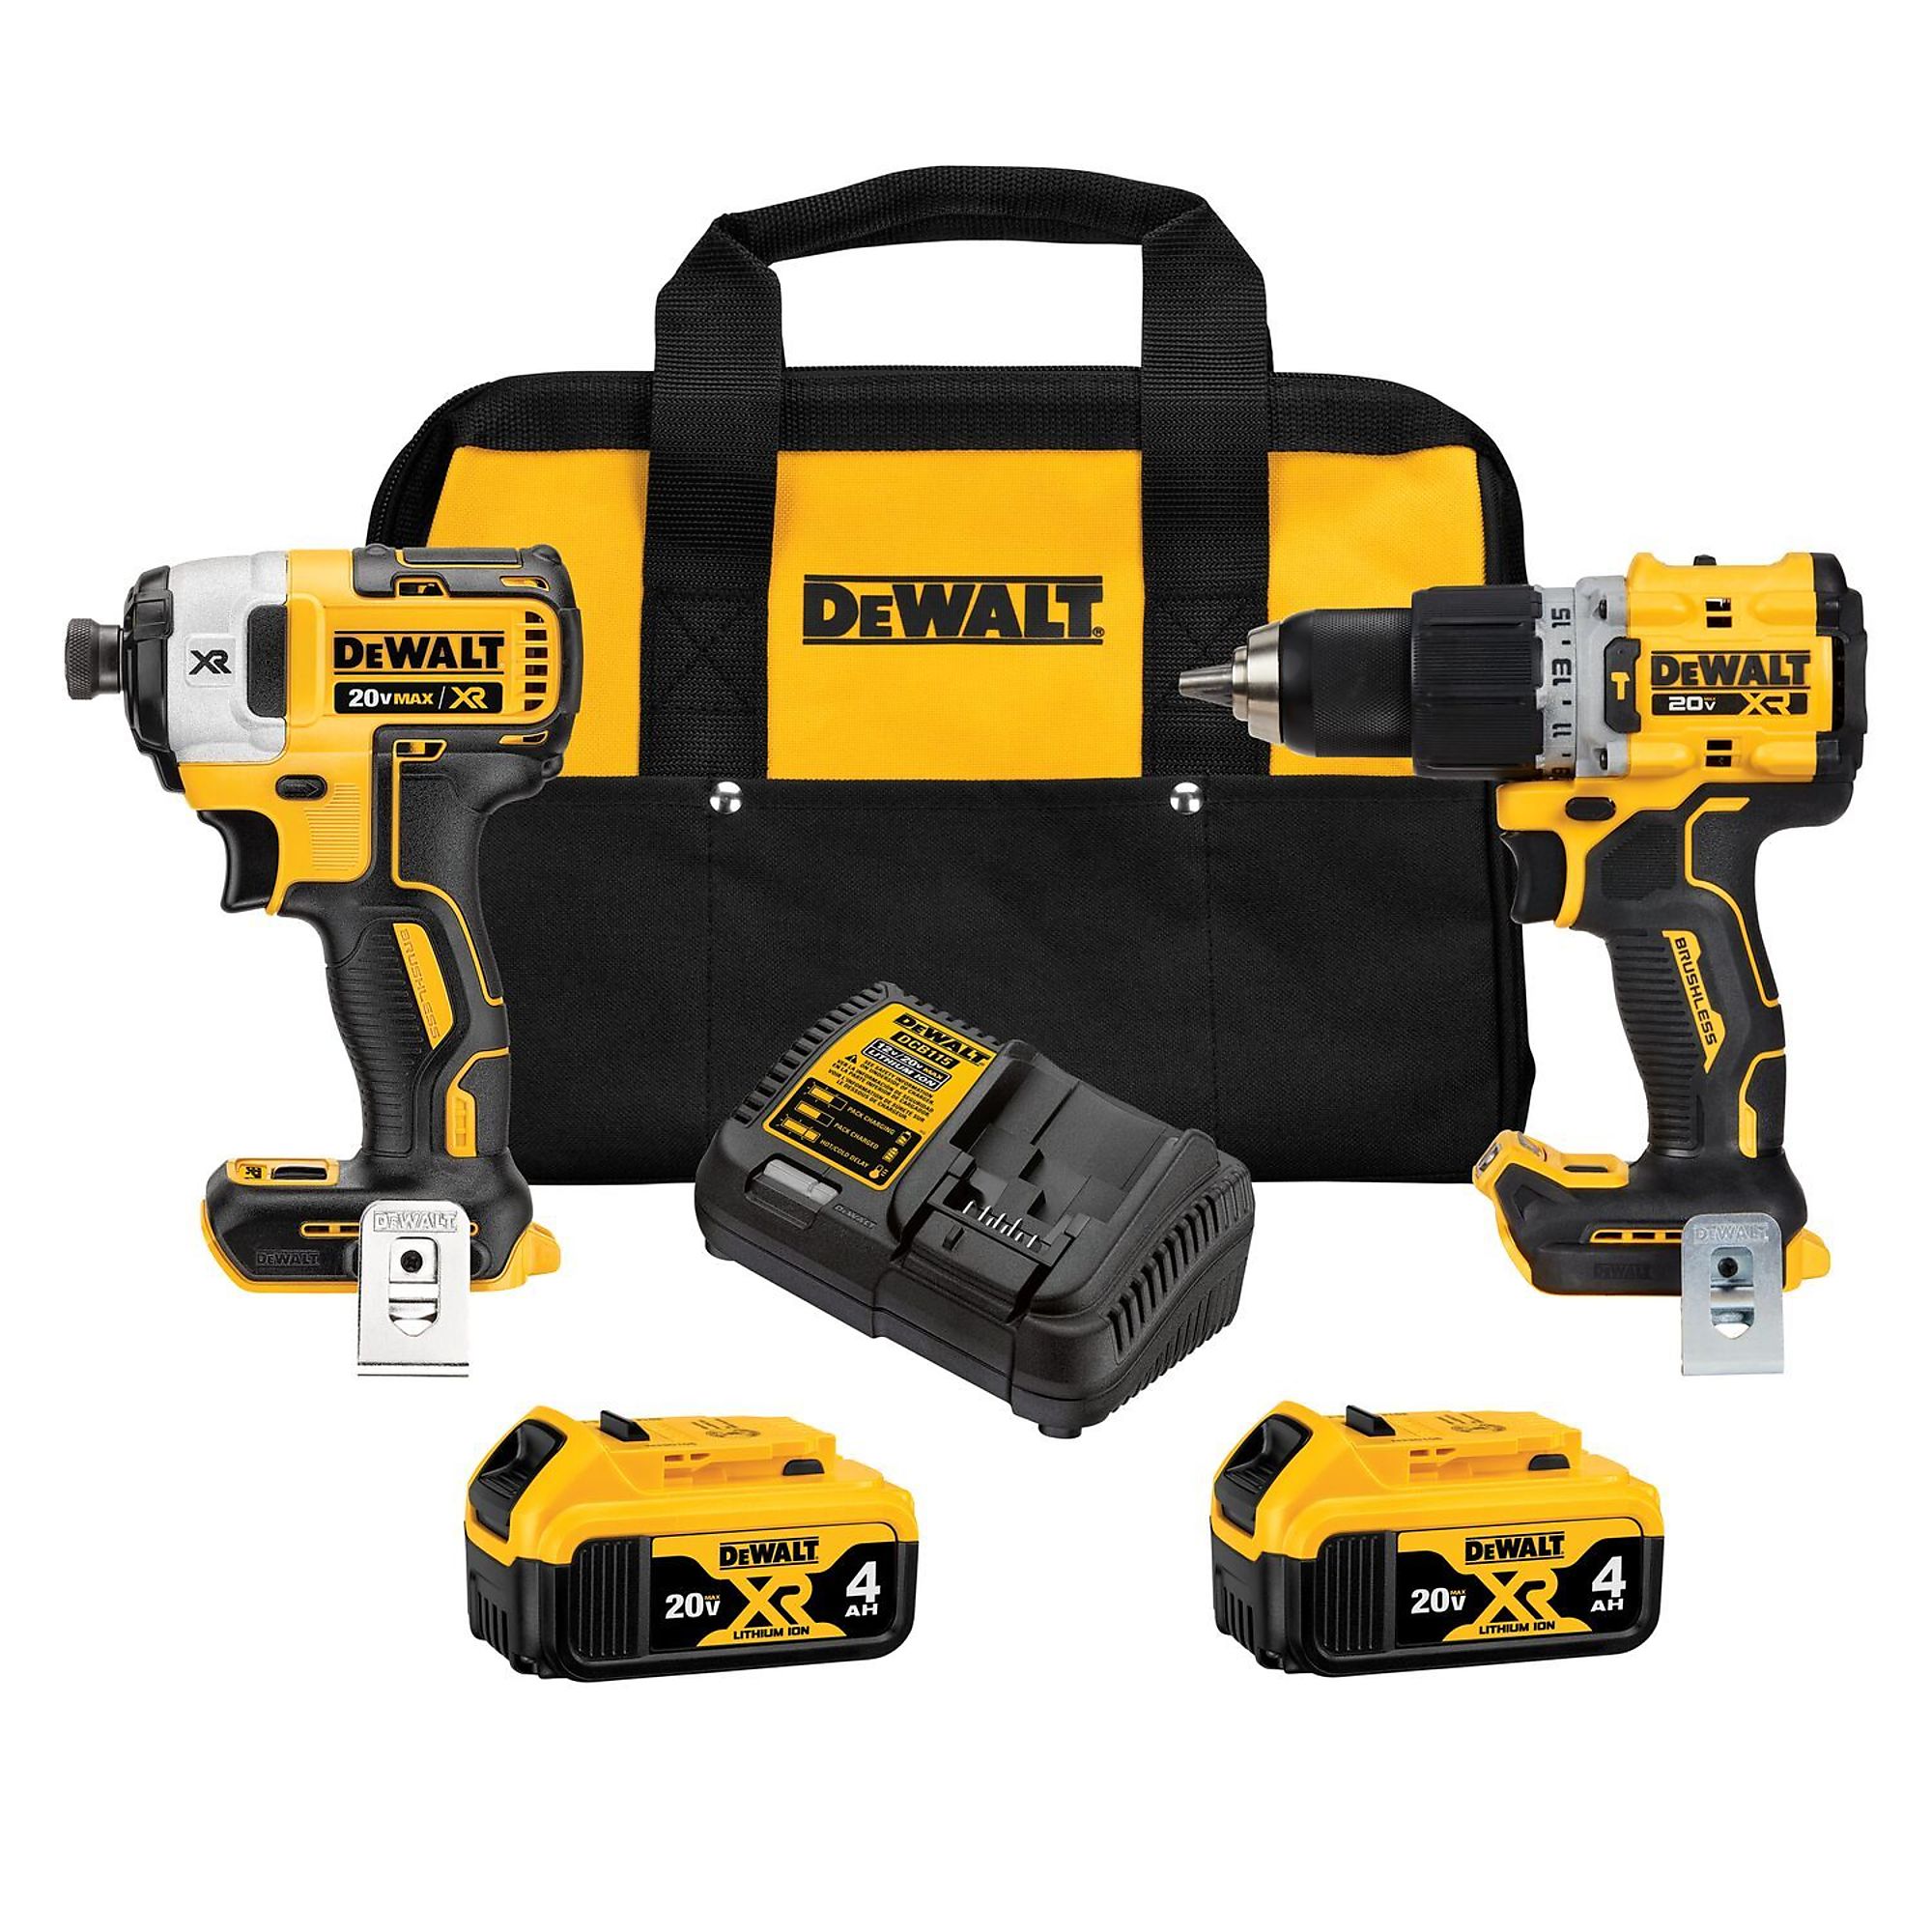 DEWALT, 20V MAX* XR Brushless 2 Combo Kit, Chuck Size 1/2 in, Drive Size 1/4 in, Tools Included (qty.) 2, Model# DCK249M2 Northern Tool